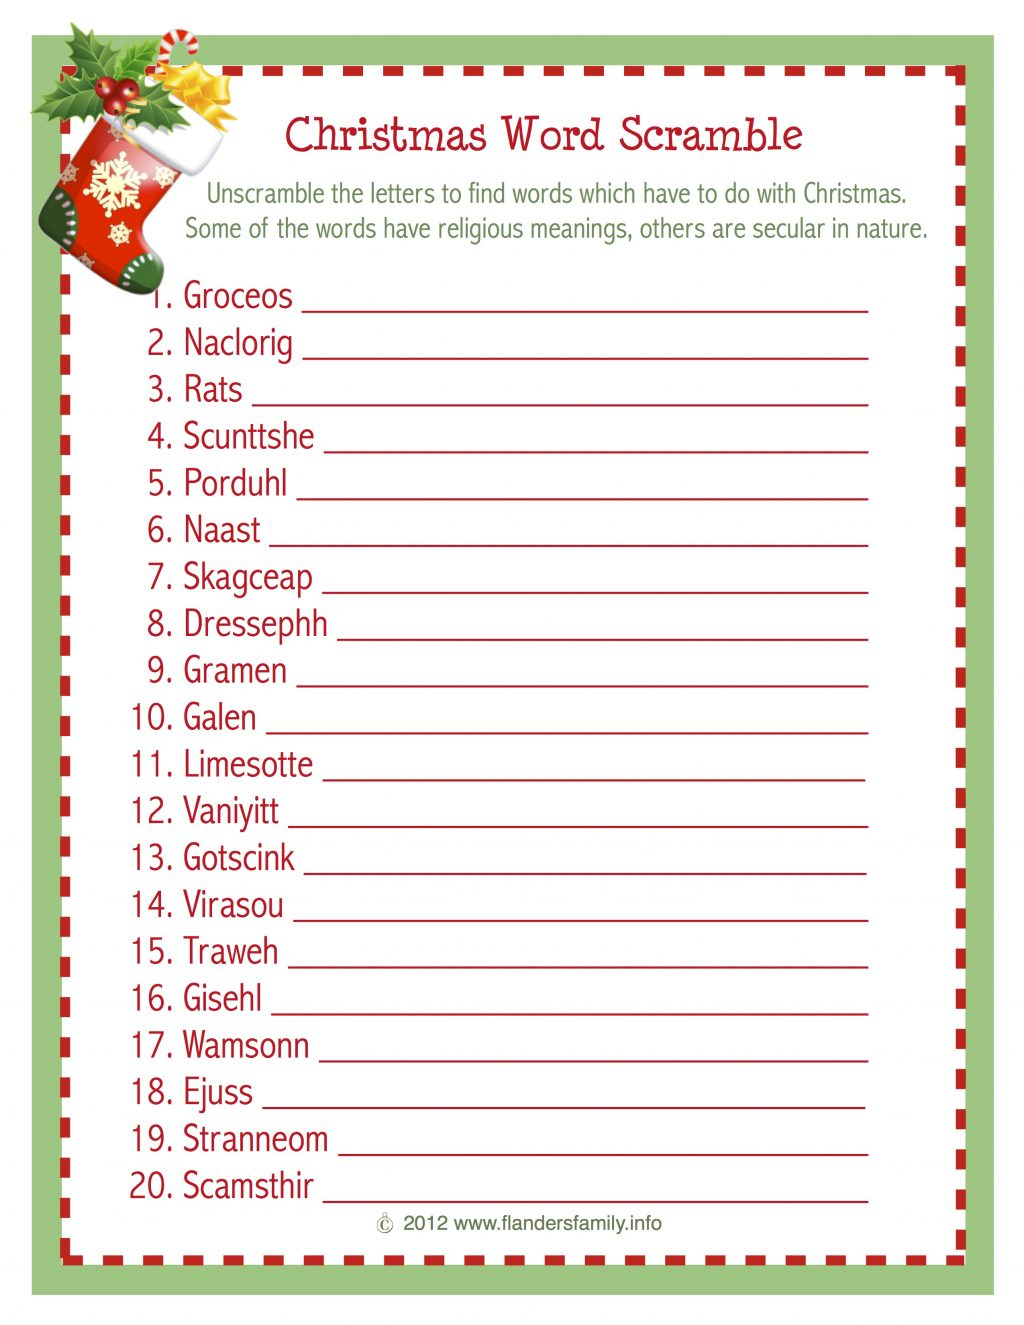 Christmas Word Scramble (Free Printable) - Flanders Family Homelife - Printable Christmas Puzzles And Quizzes